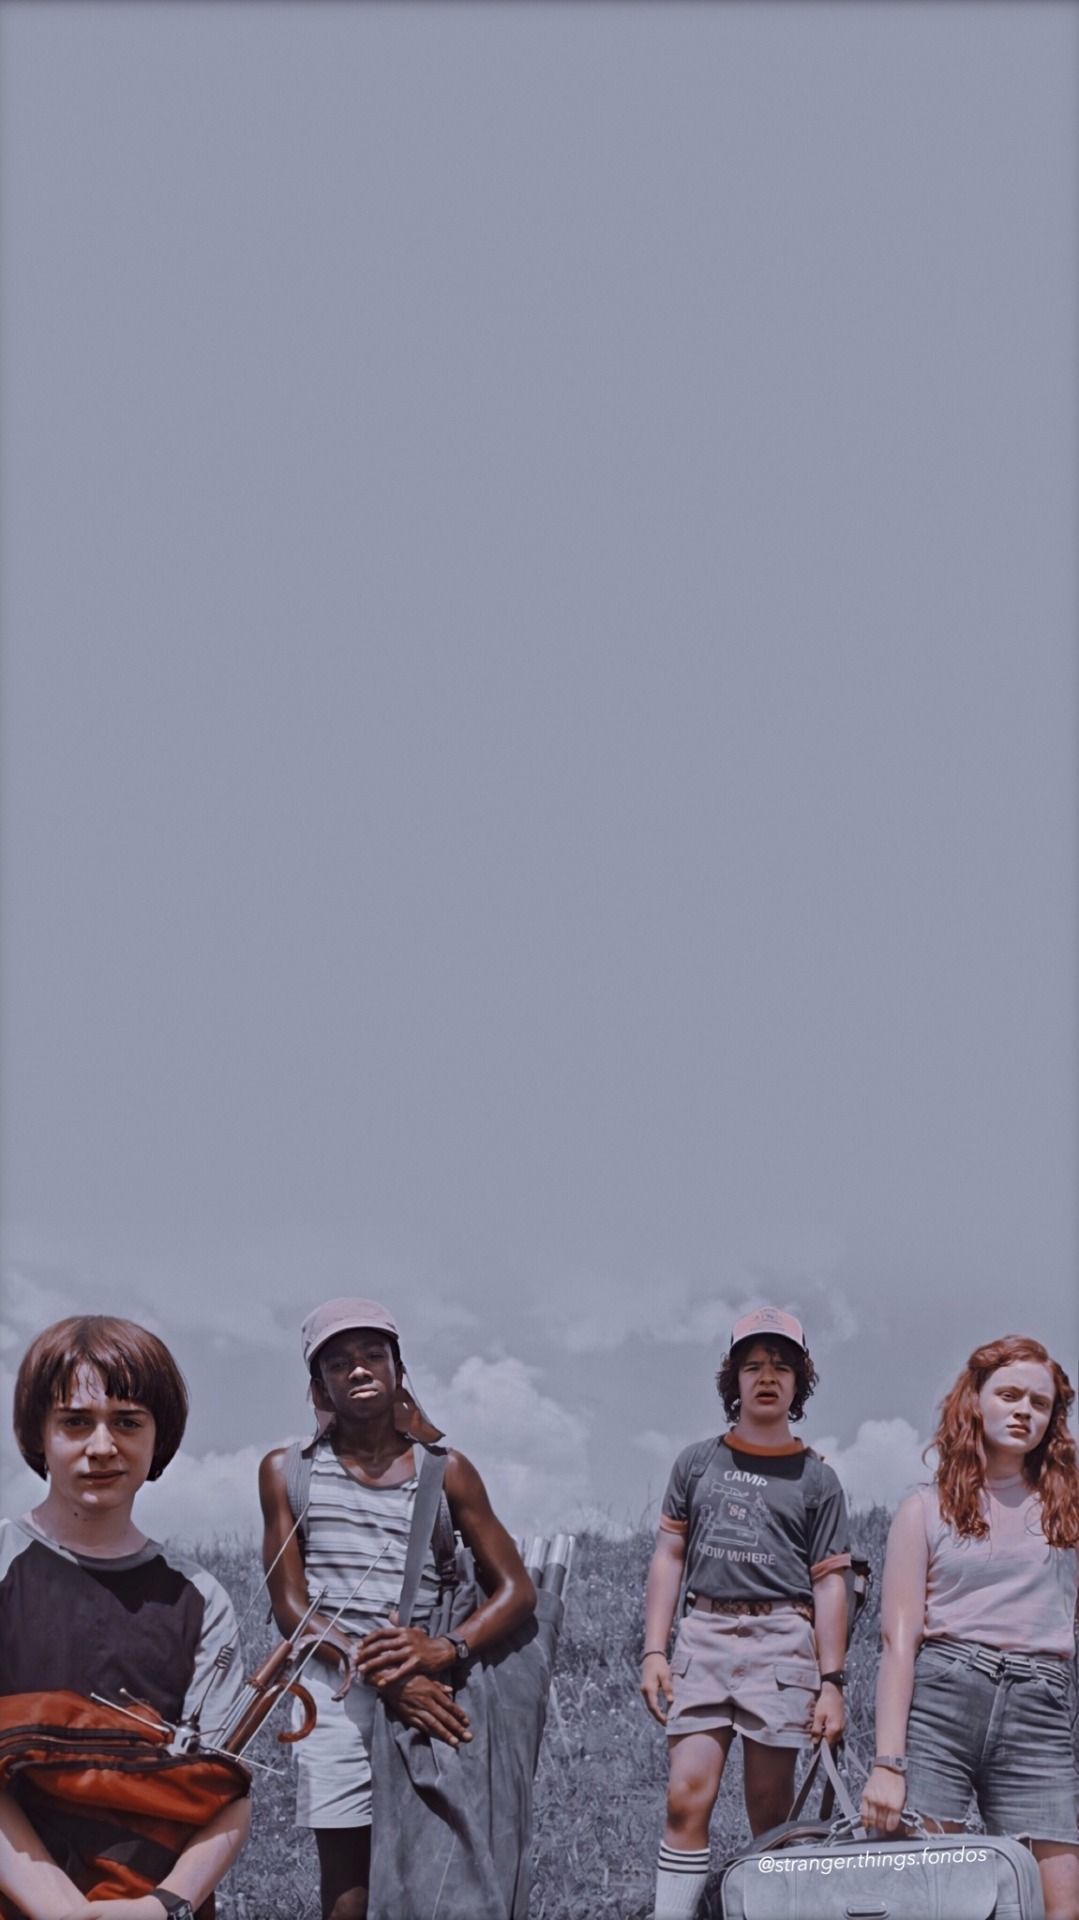 Stranger Things wallpaper for iPhone and Android with high-resolution 1080x1920 pixel. You can use this wallpaper for your iPhone 5, 6, 7, 8, X, XS, XR backgrounds, Mobile Screensaver, or iPad Lock Screen - Stranger Things